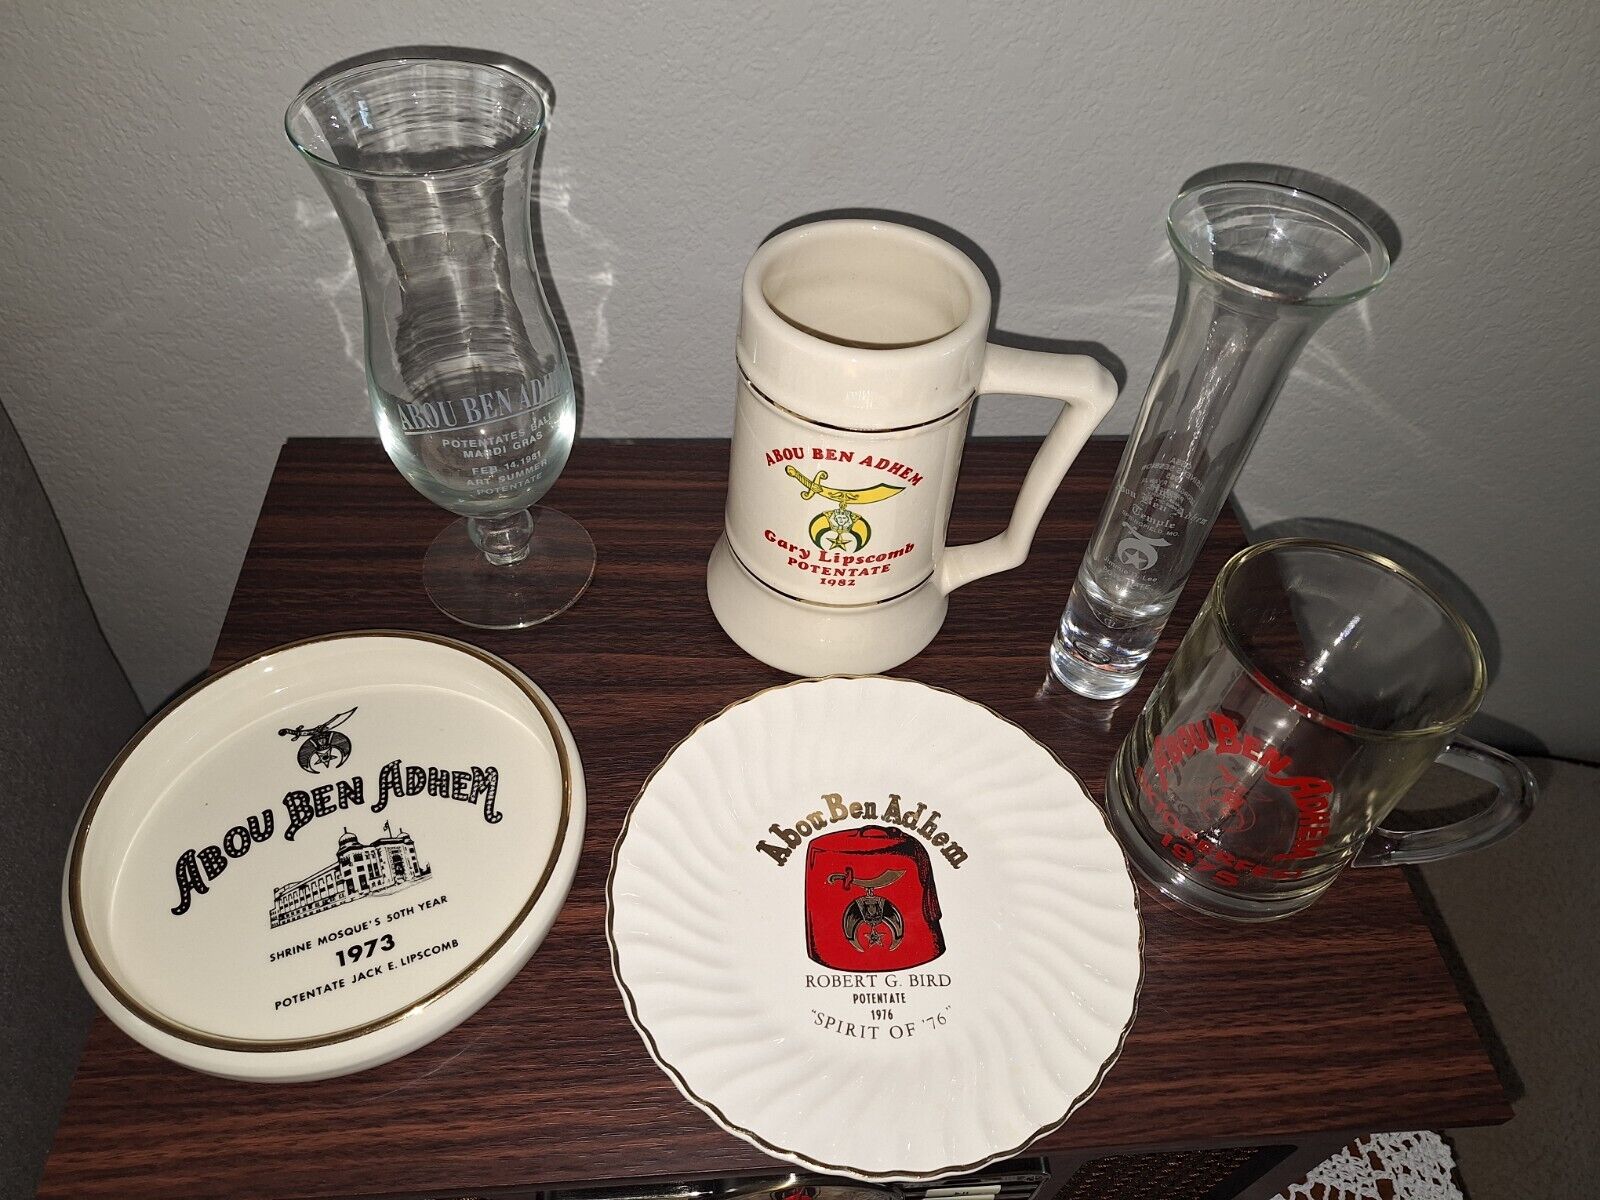 Lot of 6 Springfield Missouri Shriners collectibles.